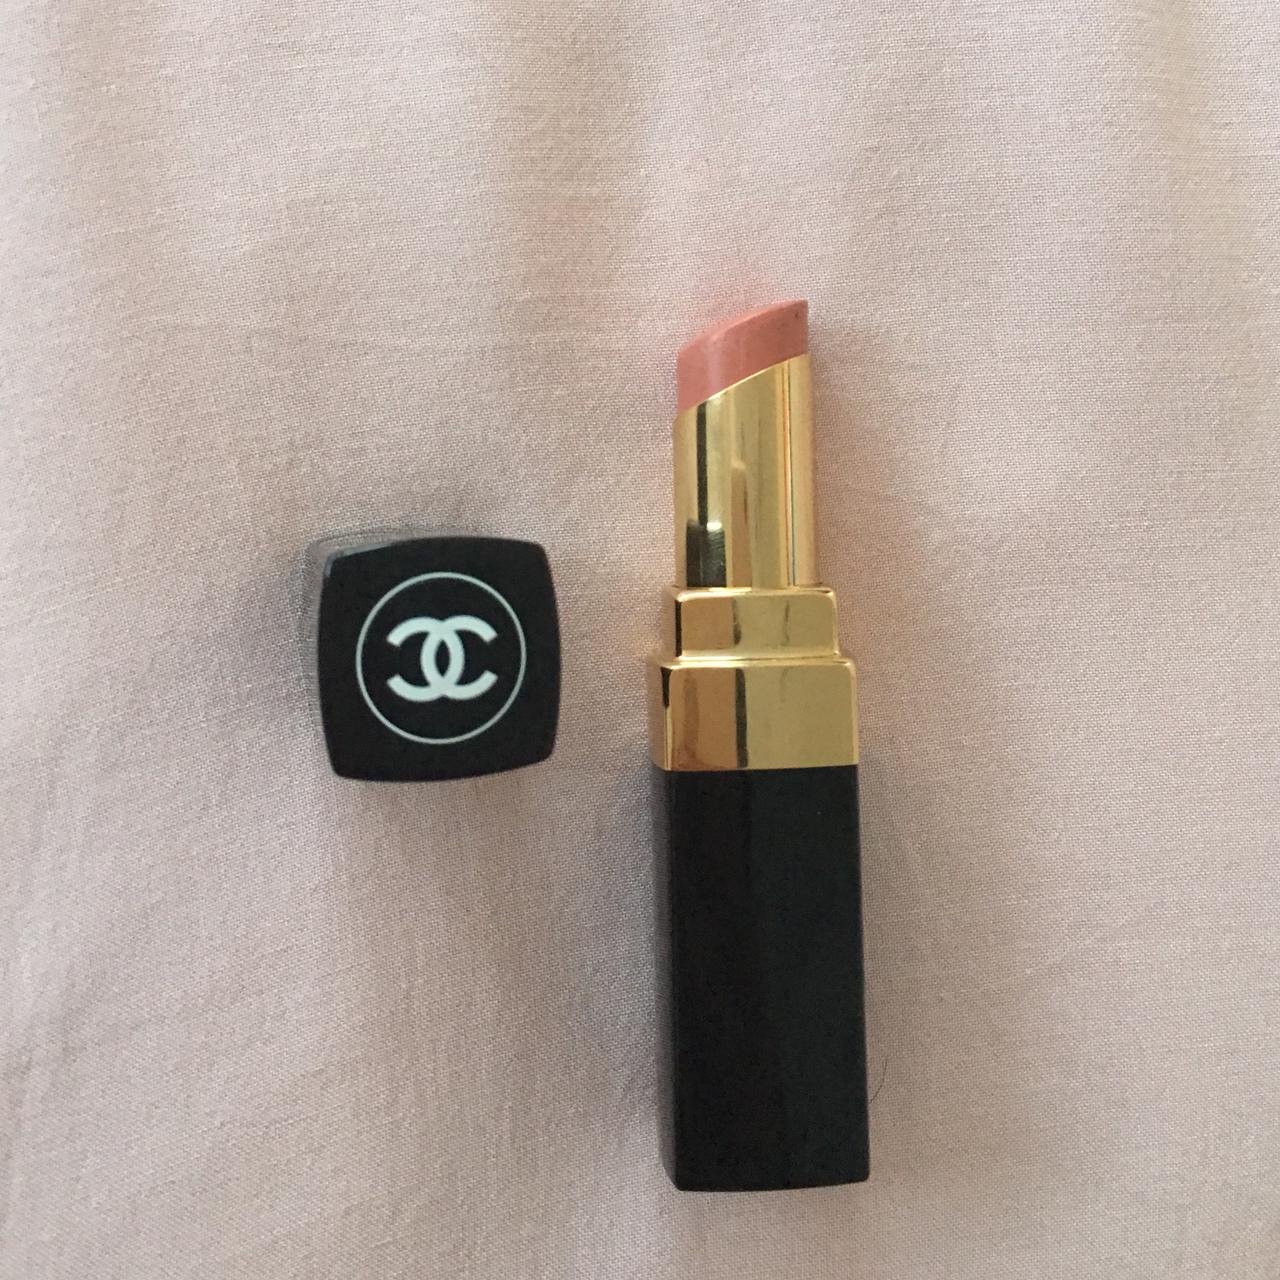 Chanel rouge coco 402 adrienne lipstick. Swatched